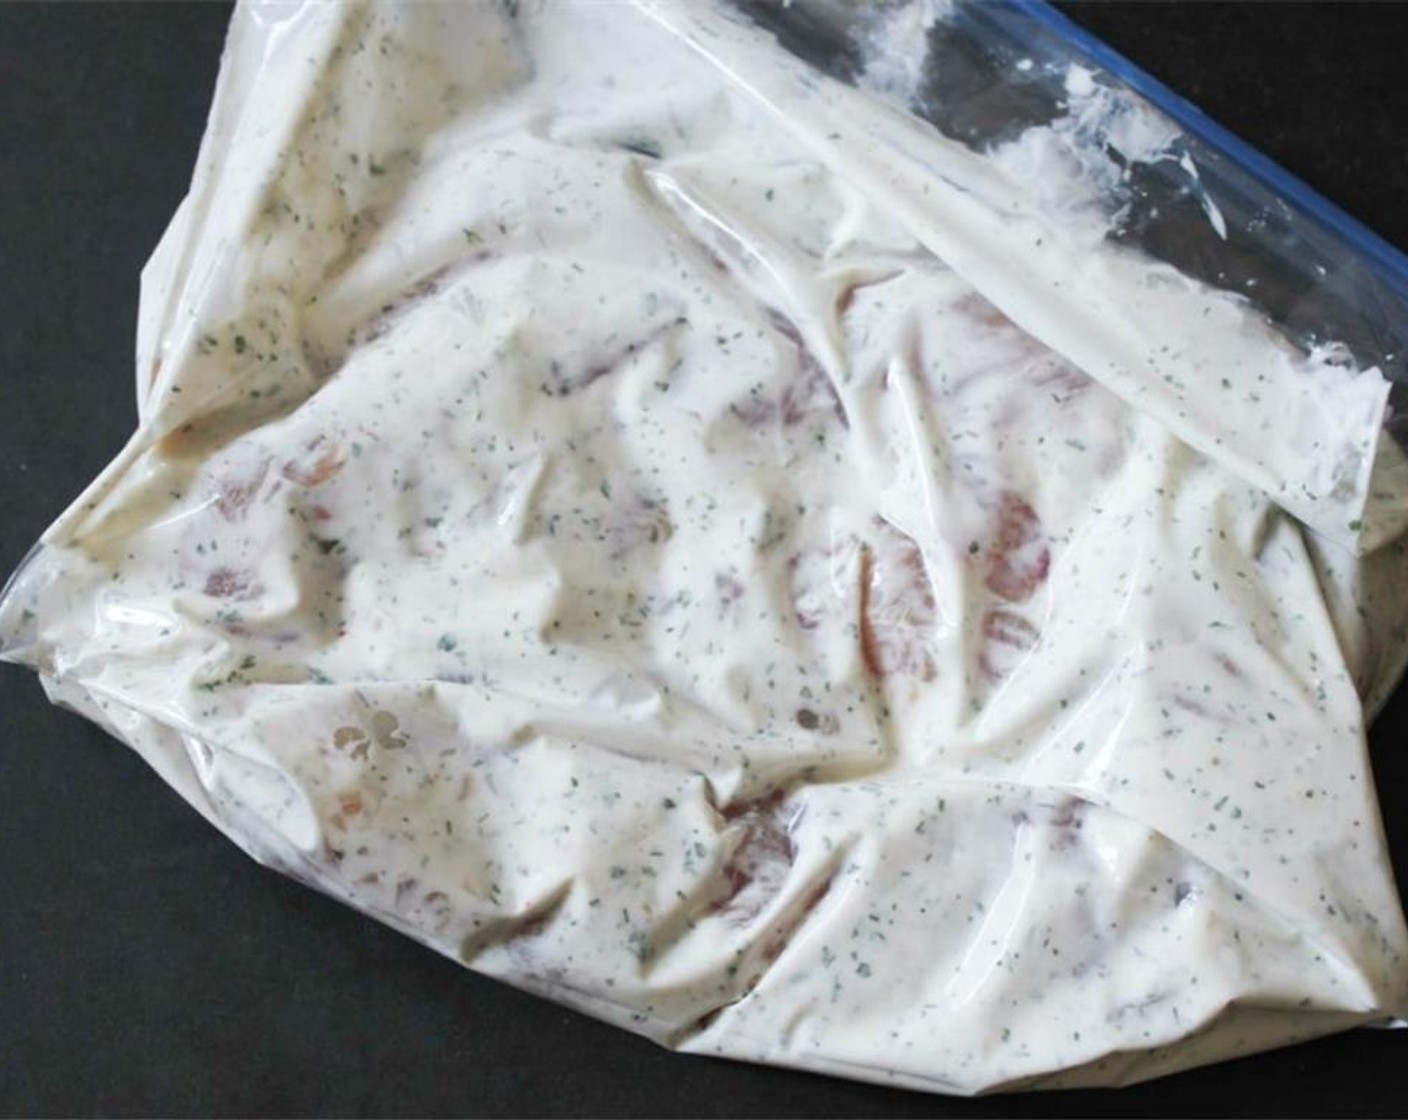 step 2 Place Chicken Tenders (1 lb) in a large Ziploc bag. Add 3/4 cup of the ranch and seal the bag, removing as much air as possible. Squish the chicken and dressing around, making sure that each tender is well coated. Refrigerate for 30 minutes.